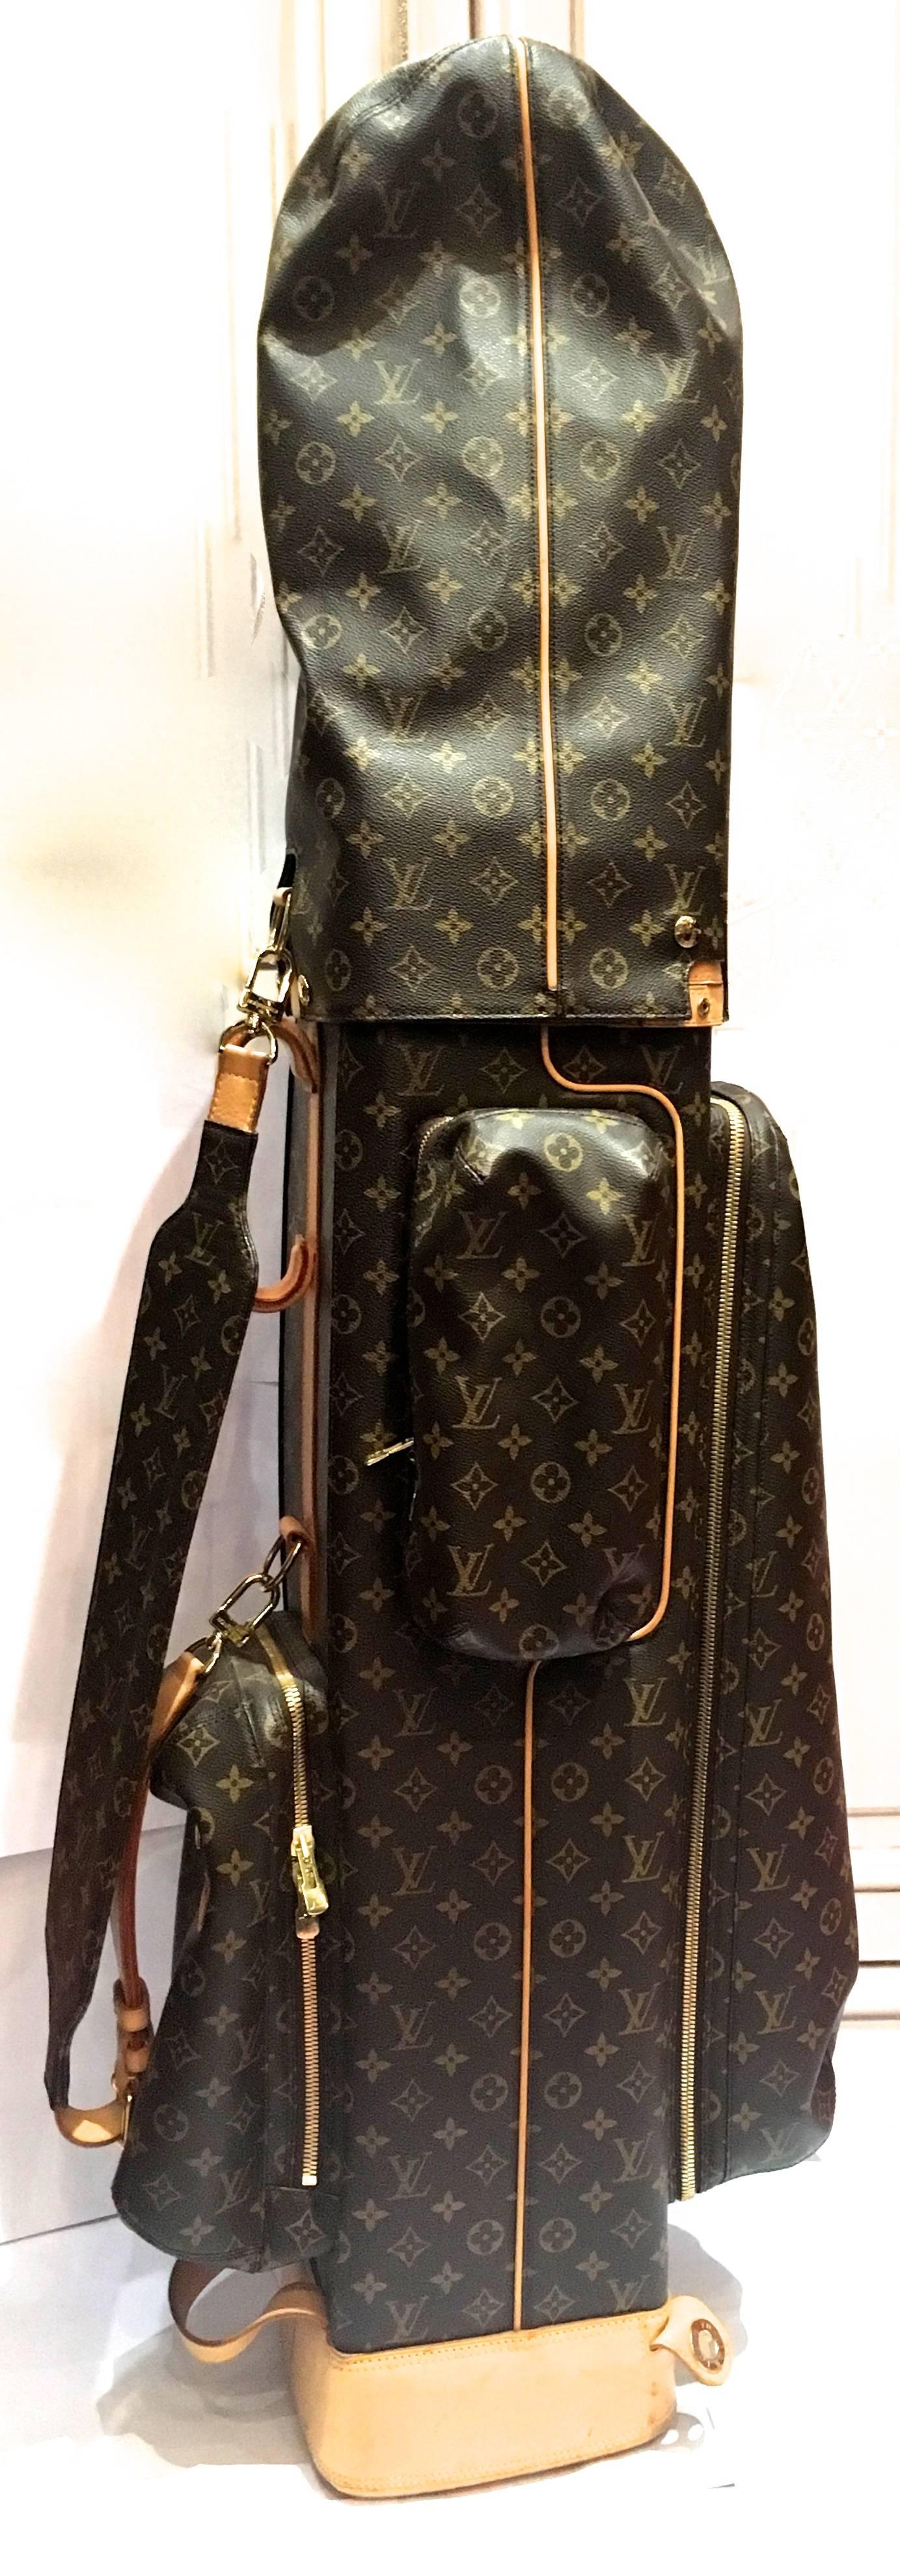 Presented here is a fantastic golf club bag / case from Louis Vuitton Paris. This fabulous case is made from the iconic Louis Vuitton monogrammed leather pattern that has been a paramount design throughout the Louis Vuitton brand for many years. The